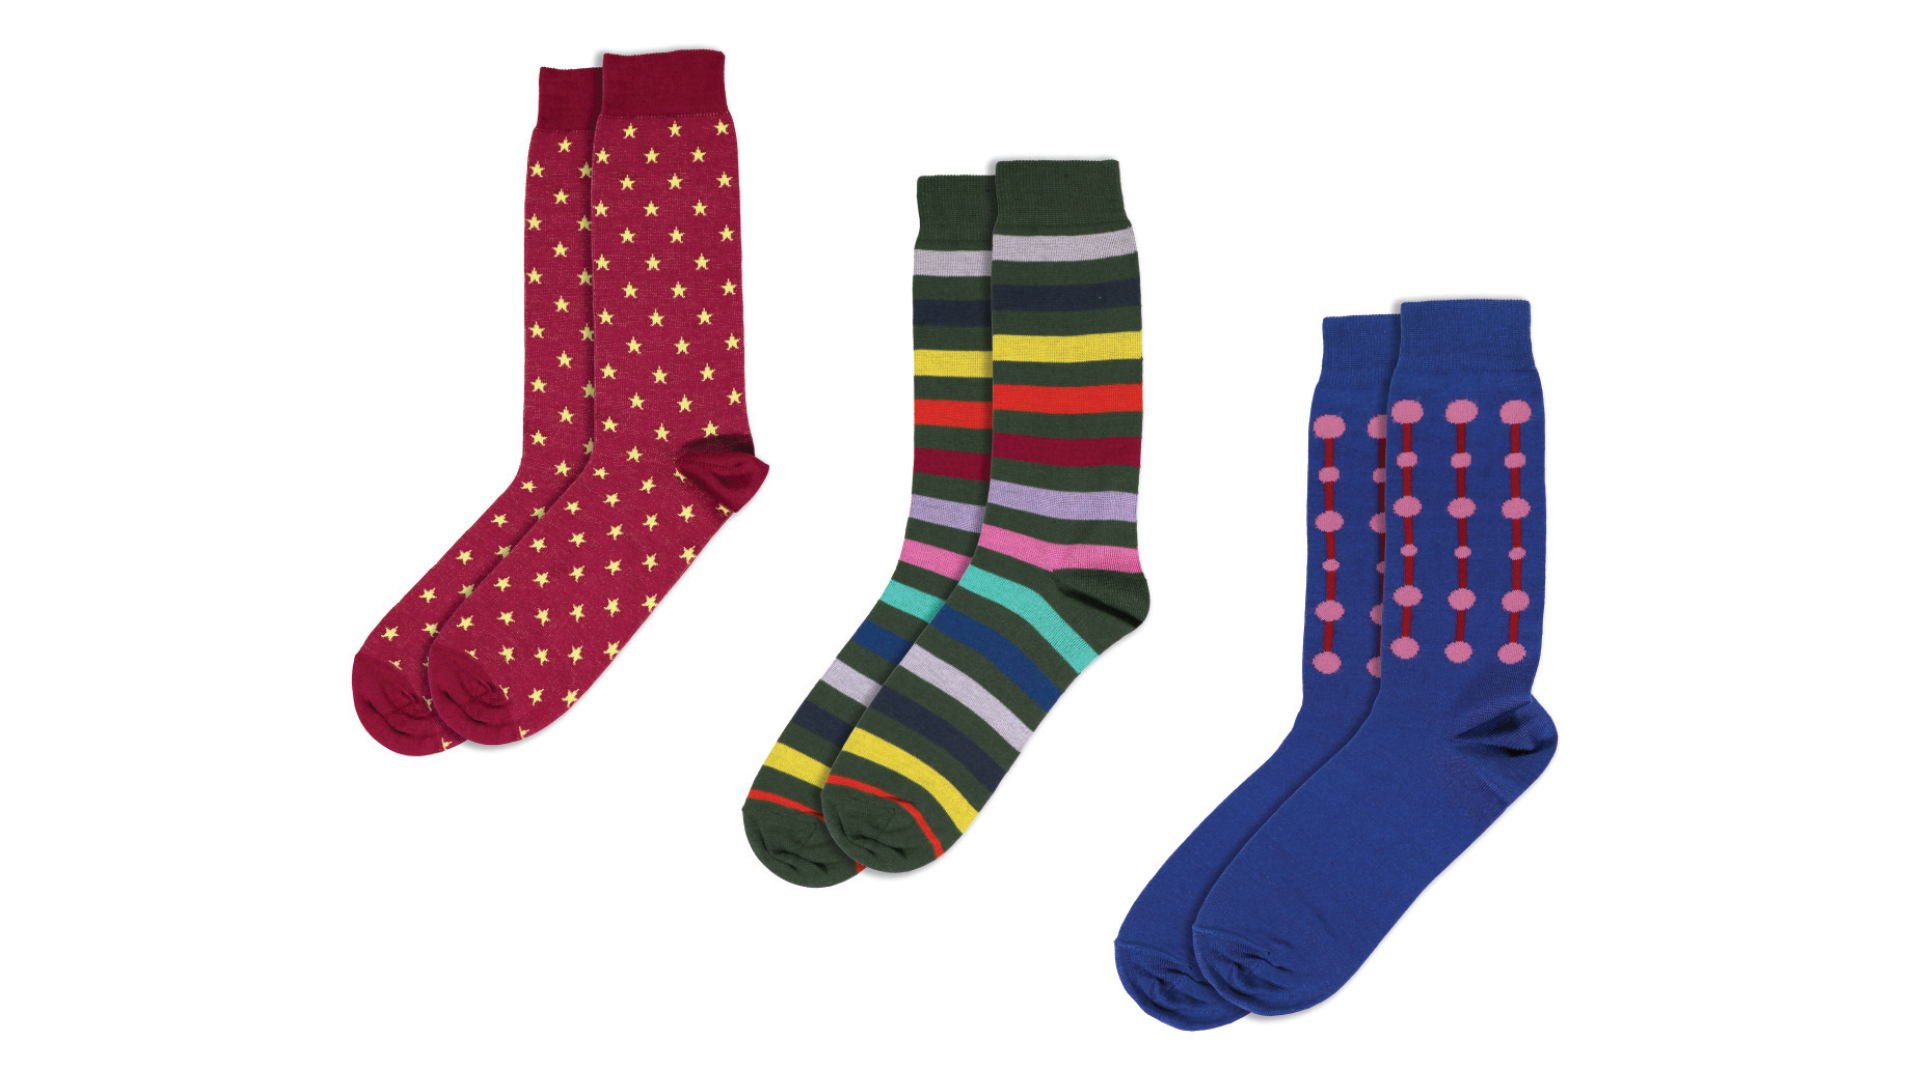 These Italian Made Socks Are the Classiest Stocking Stuffers